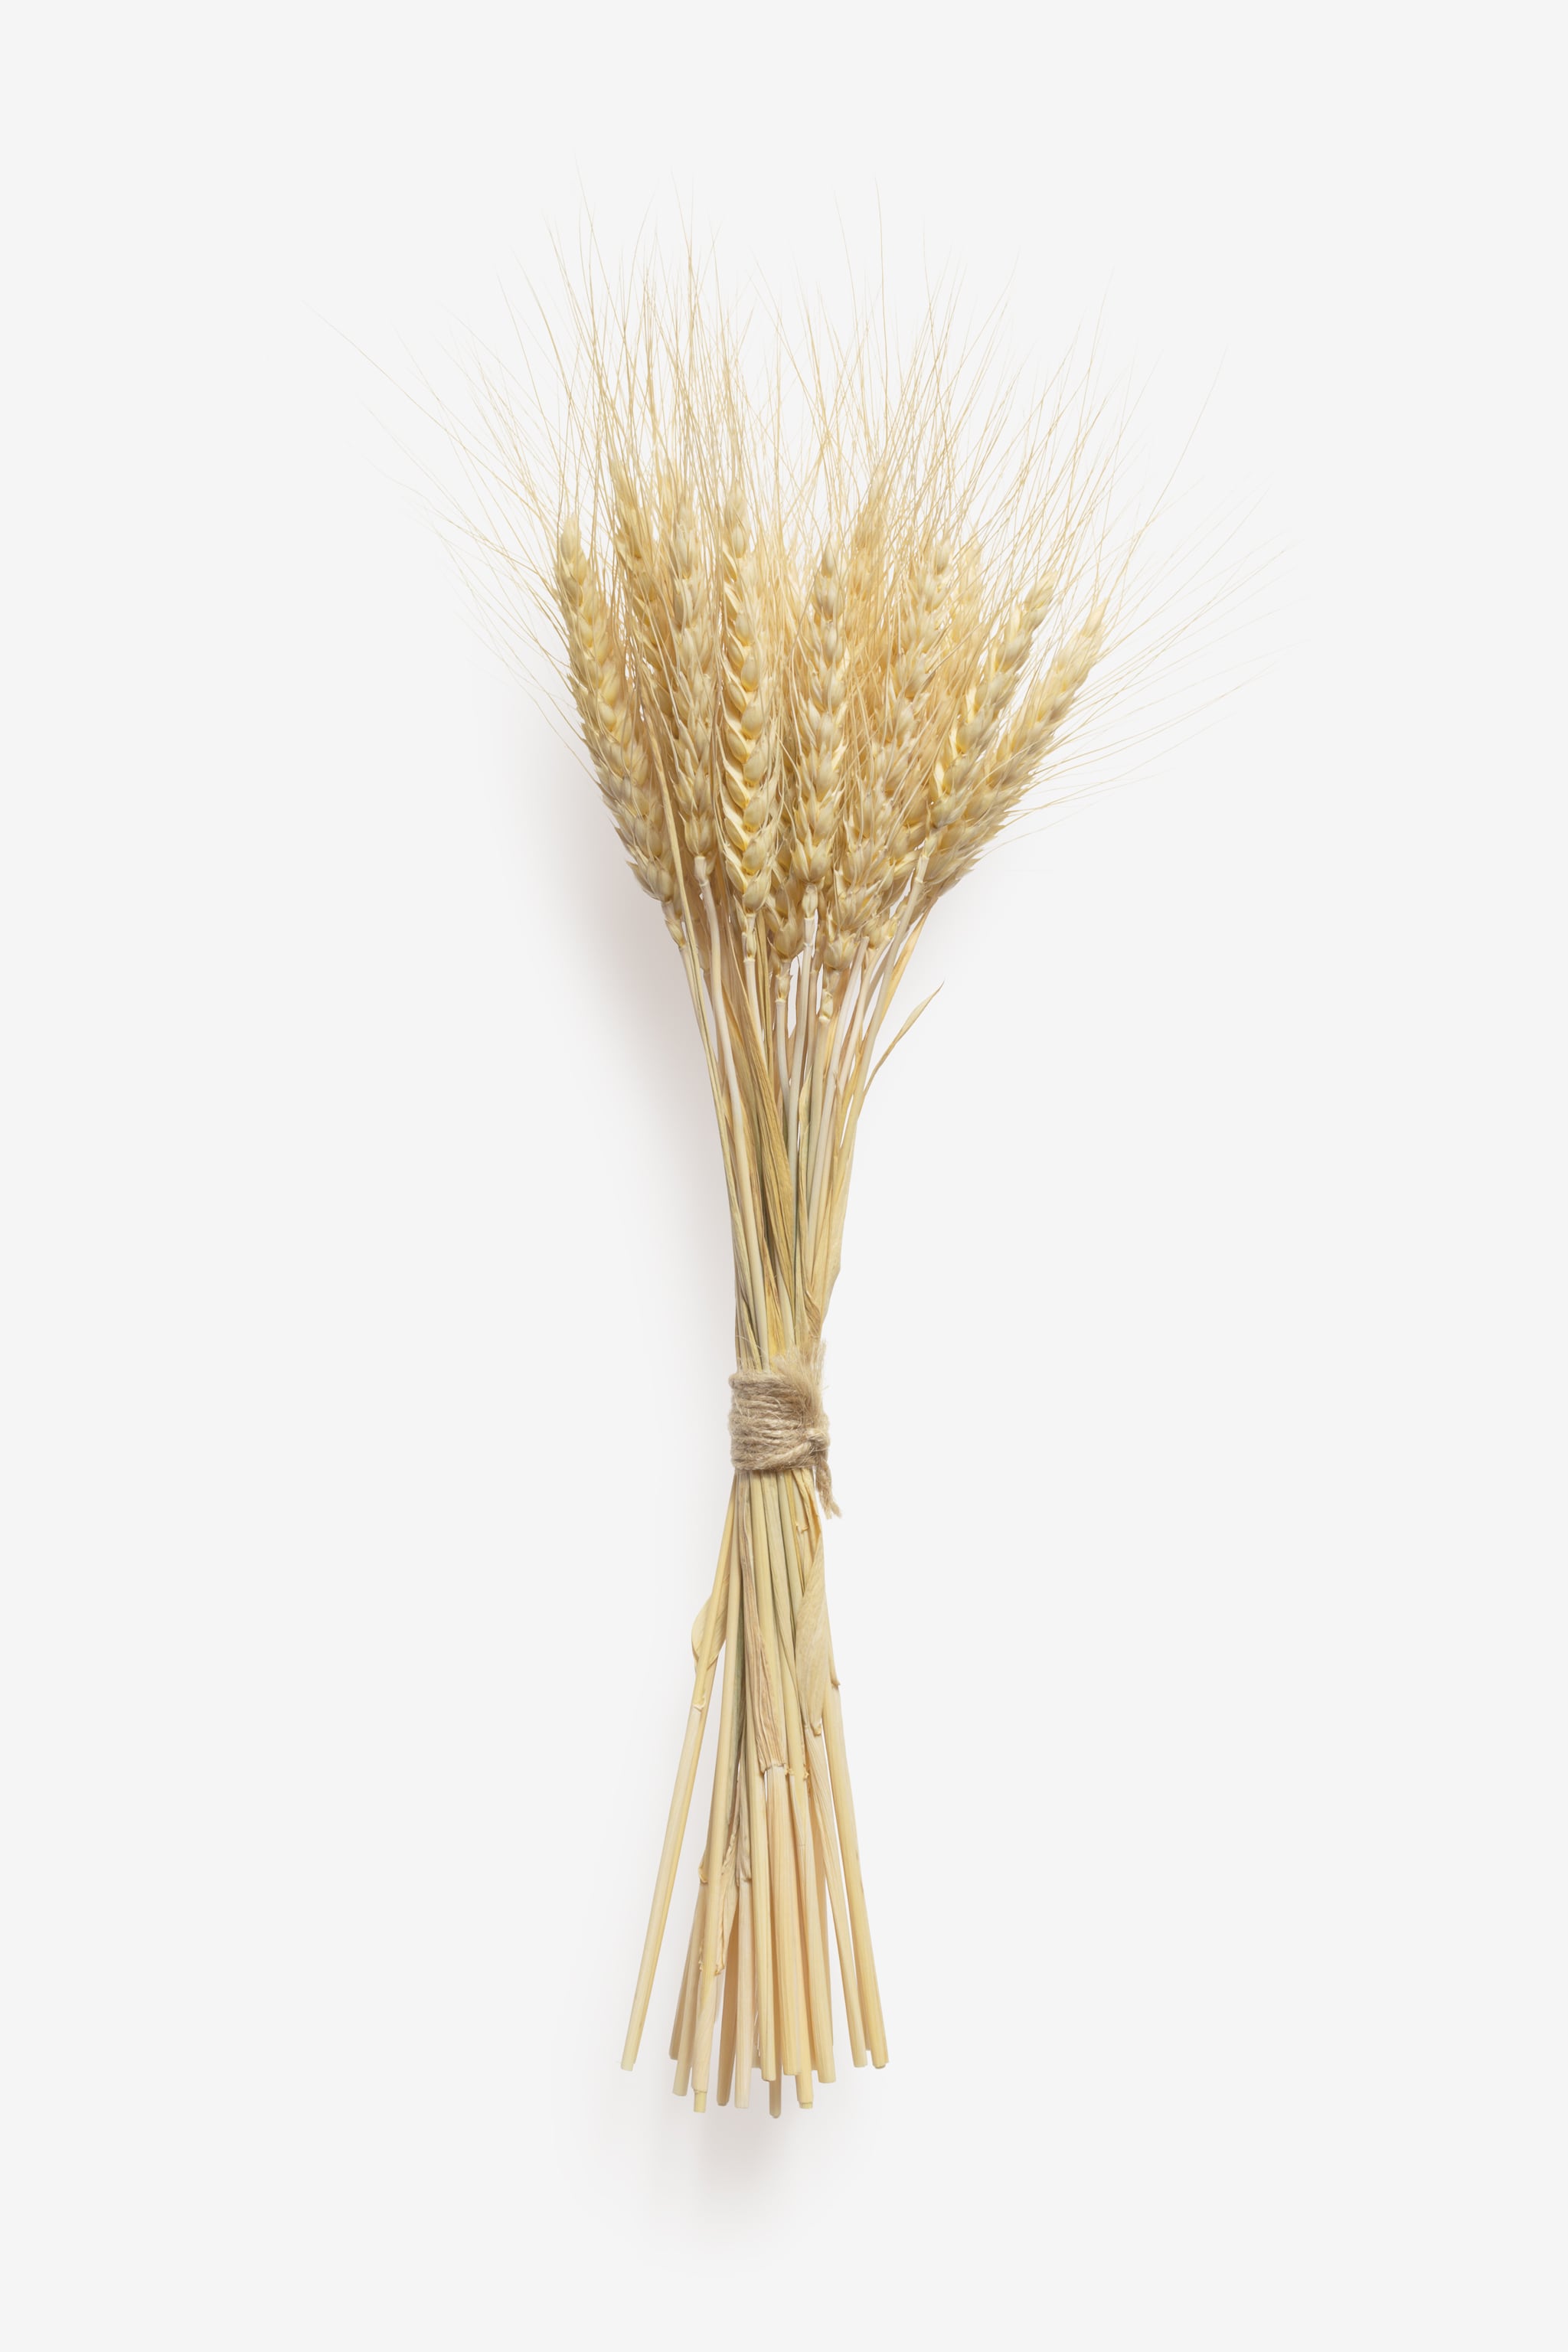 Clean Isolated PSD image of Spikelet on transparent background with separated shadow